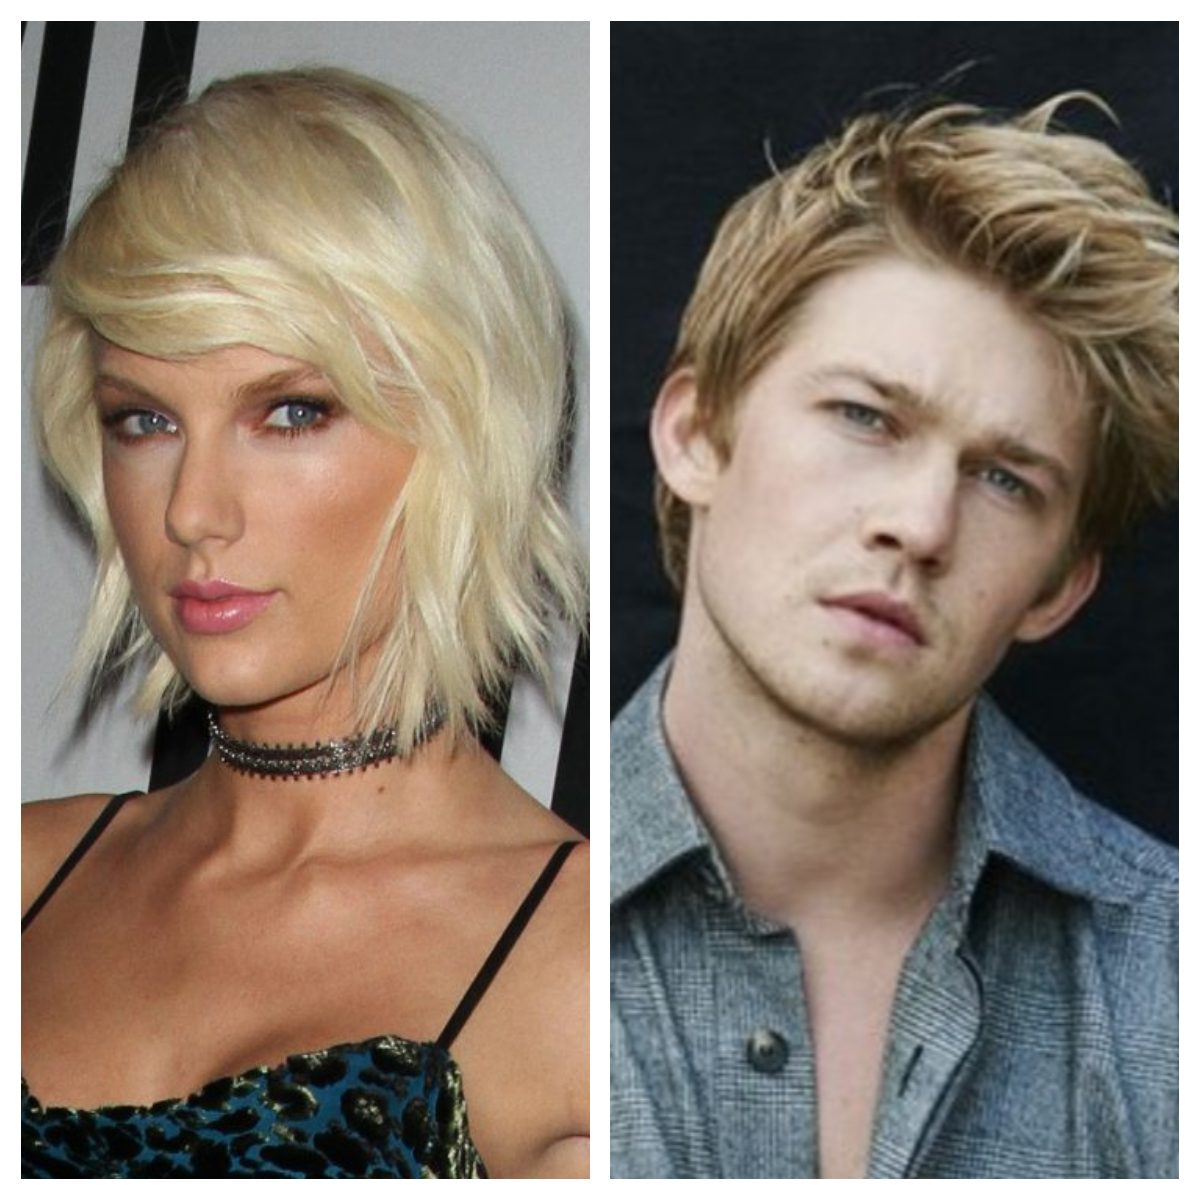 Taylor Swift's boyfriend Joe Alwyn opens up about his relationship with